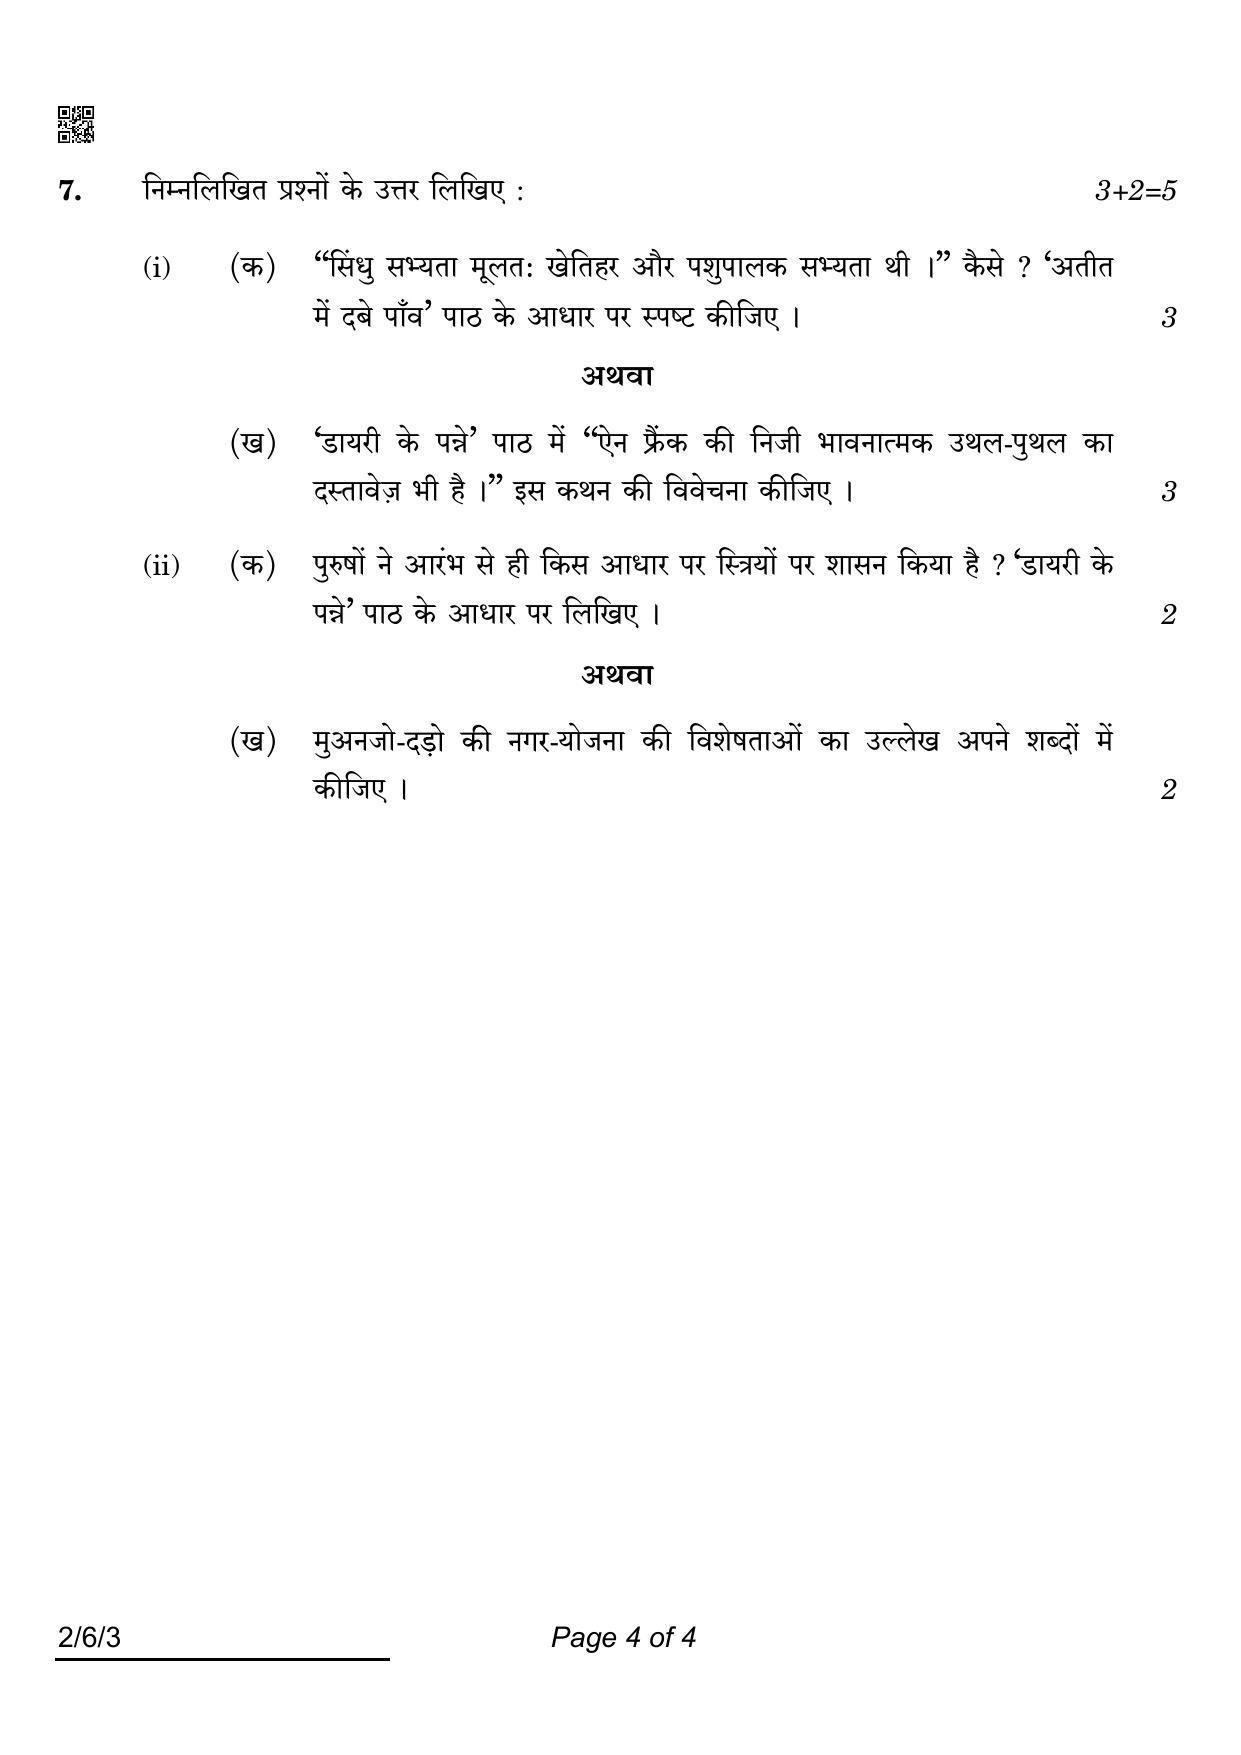 CBSE Class 12 2-6-3 Hindi Core 2022 Compartment Question Paper - Page 4